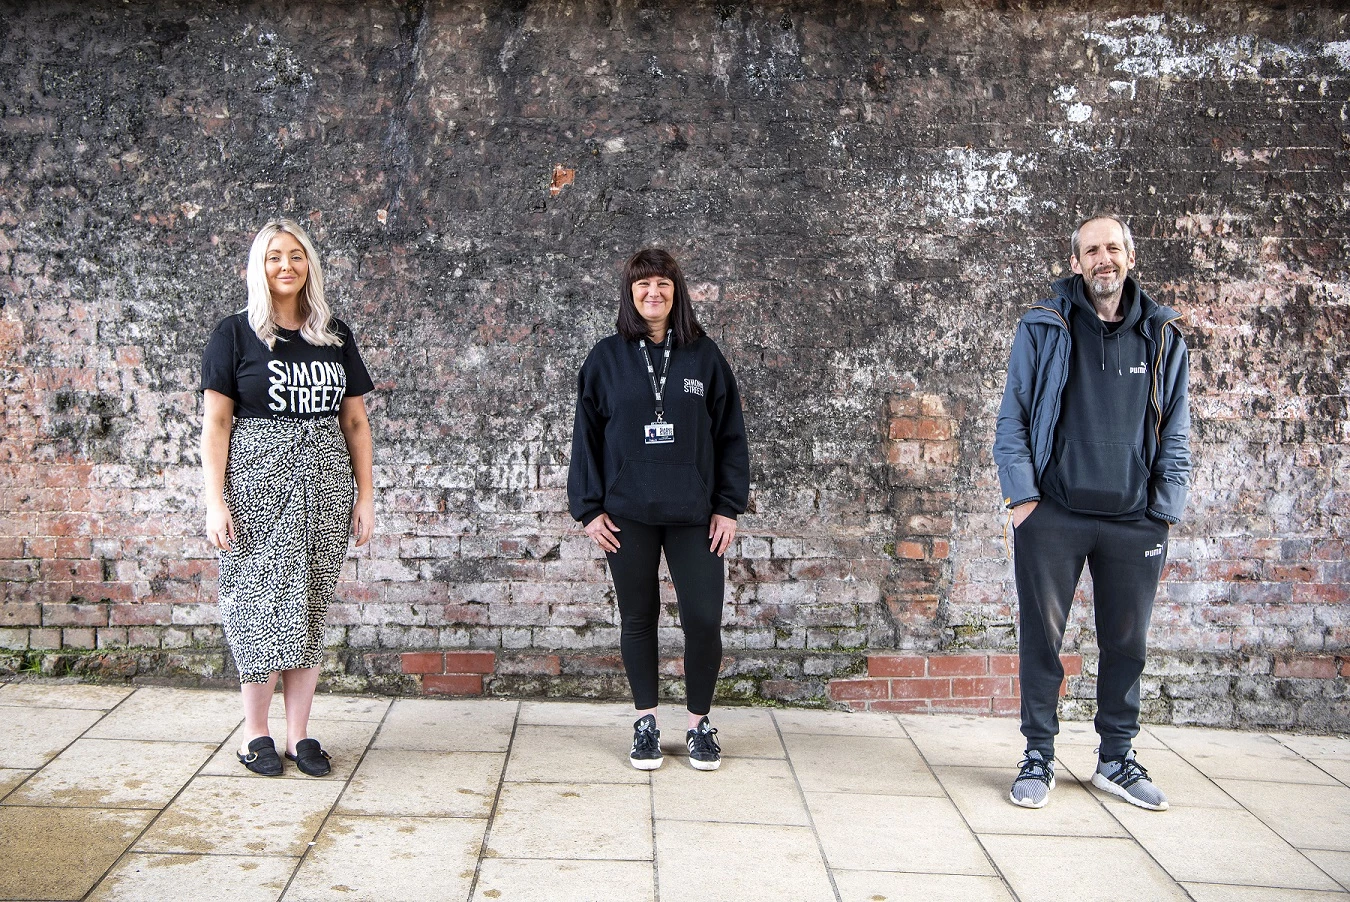 Photography by Sam Toolsie, L-R Leah Charlson, Liz Knight, Scotty Bell.